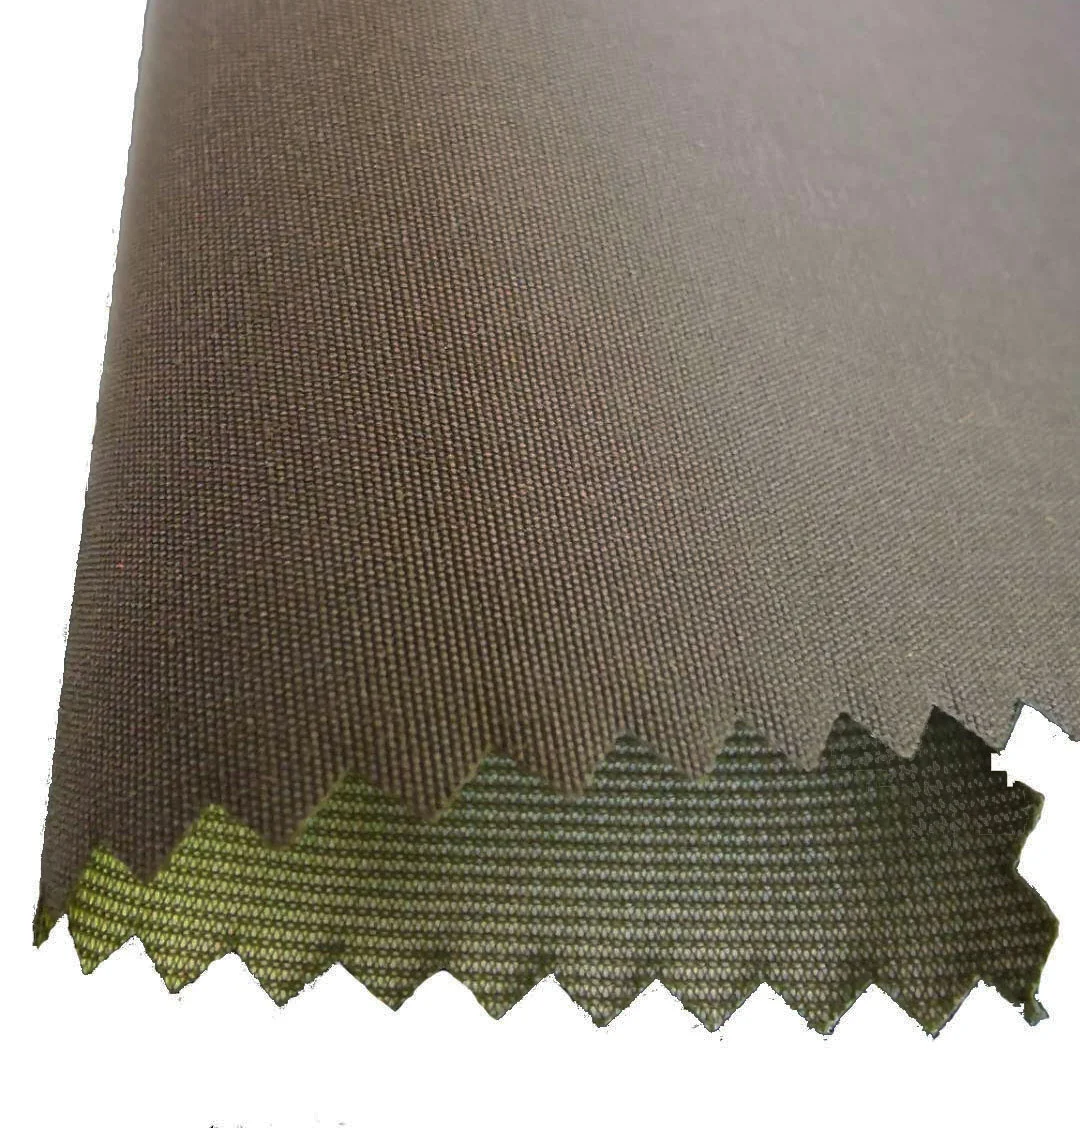 
Laminated air permeable fabric, e PTFE Membrane Laminated Waterproof Breathable Fabric For Military  (60219703195)